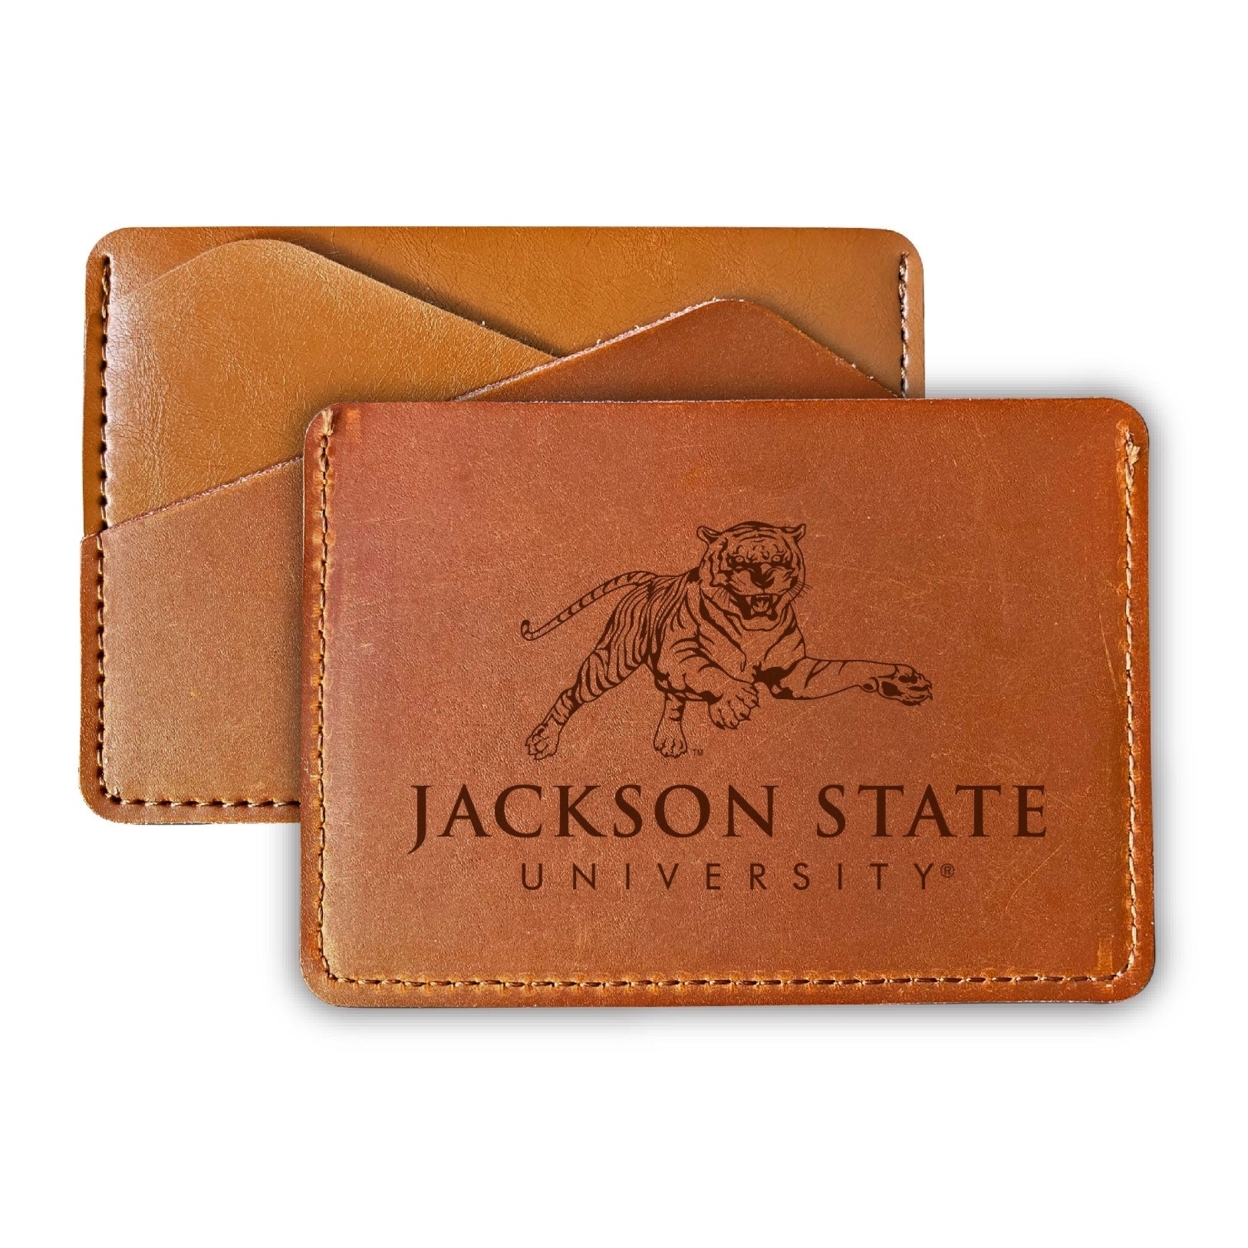 Jackson State University College Leather Card Holder Wallet